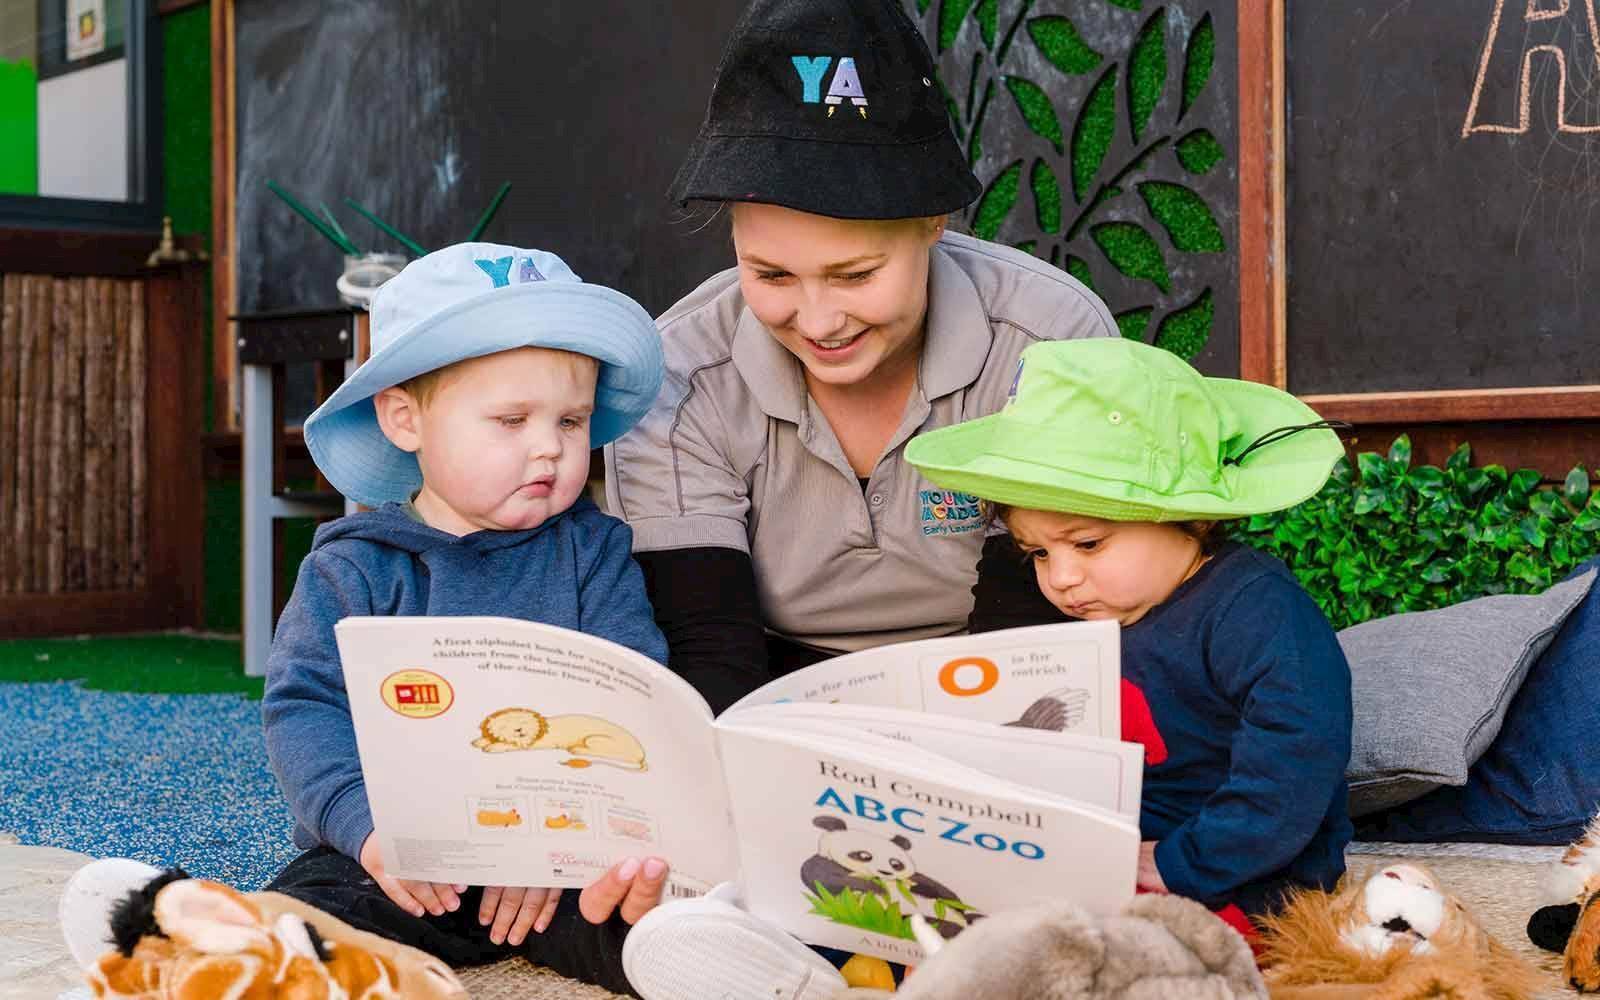 Young Academics Early Learning Centre - Woodcroft, Cobblestone Childcare Centre